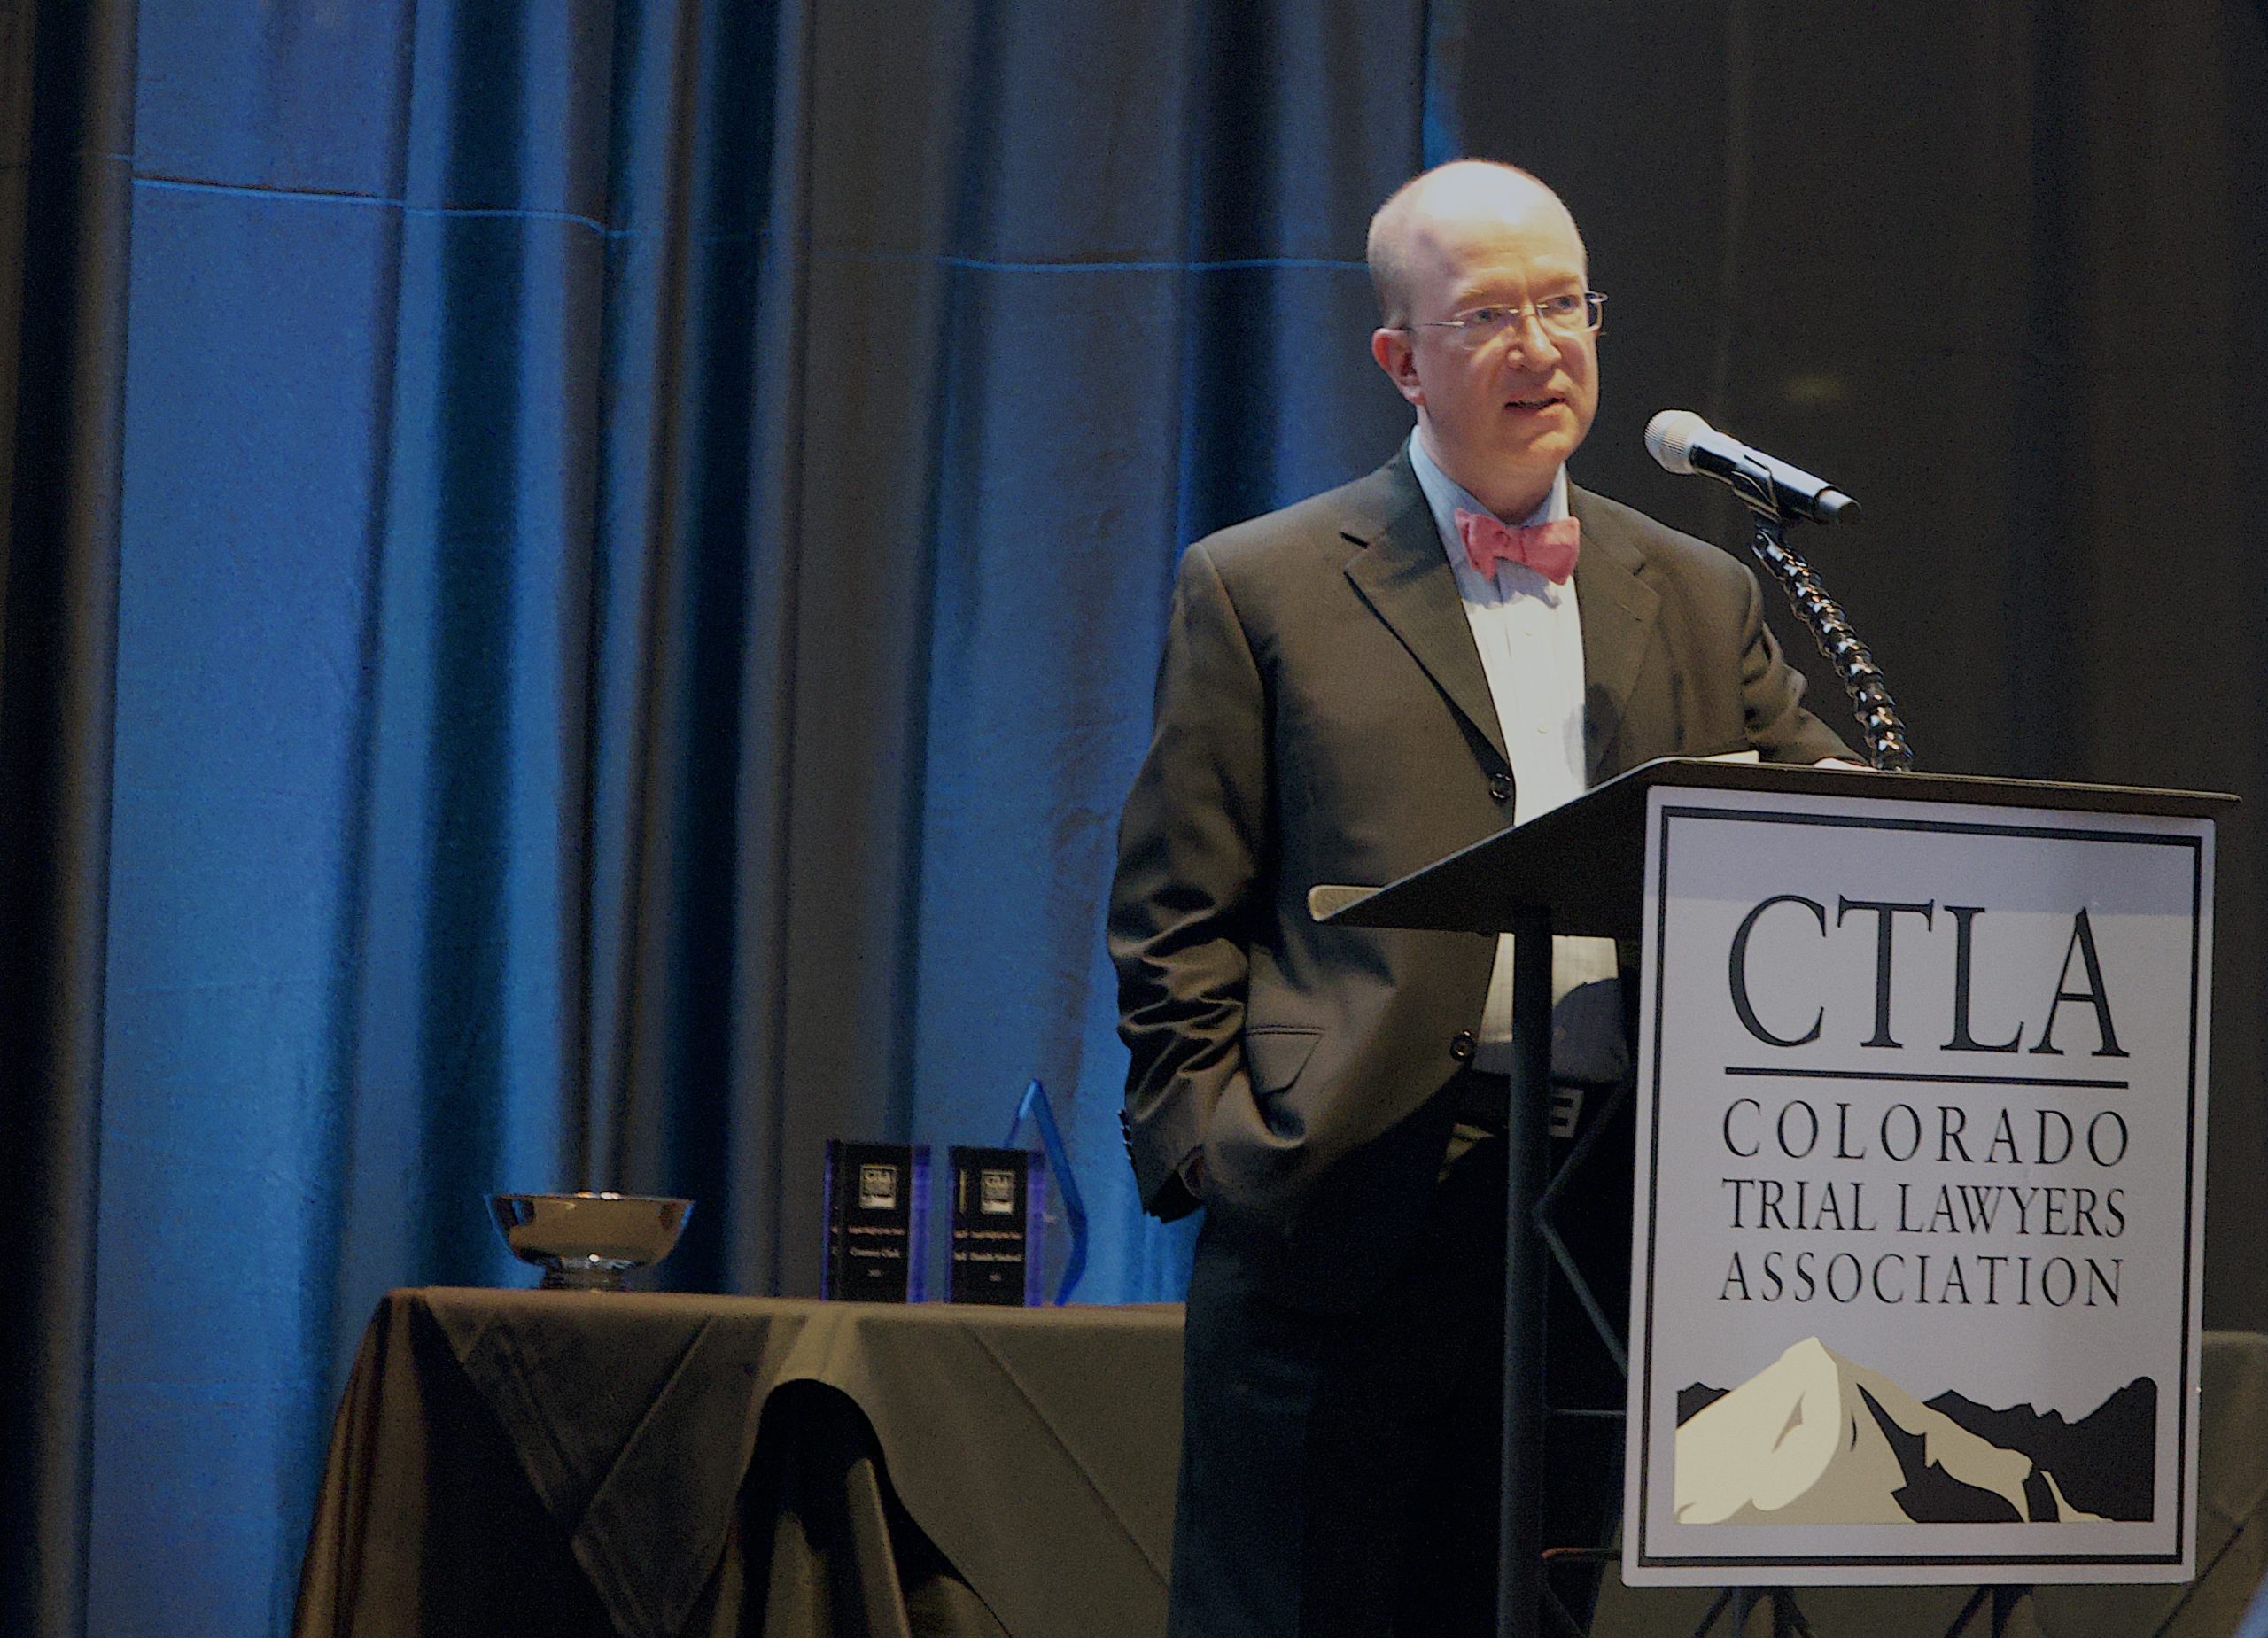 A middle aged bald man in a suit with a red bowtie speaks at a podium on a stage that reads CTLA Colorado Trial Lawyers Association.